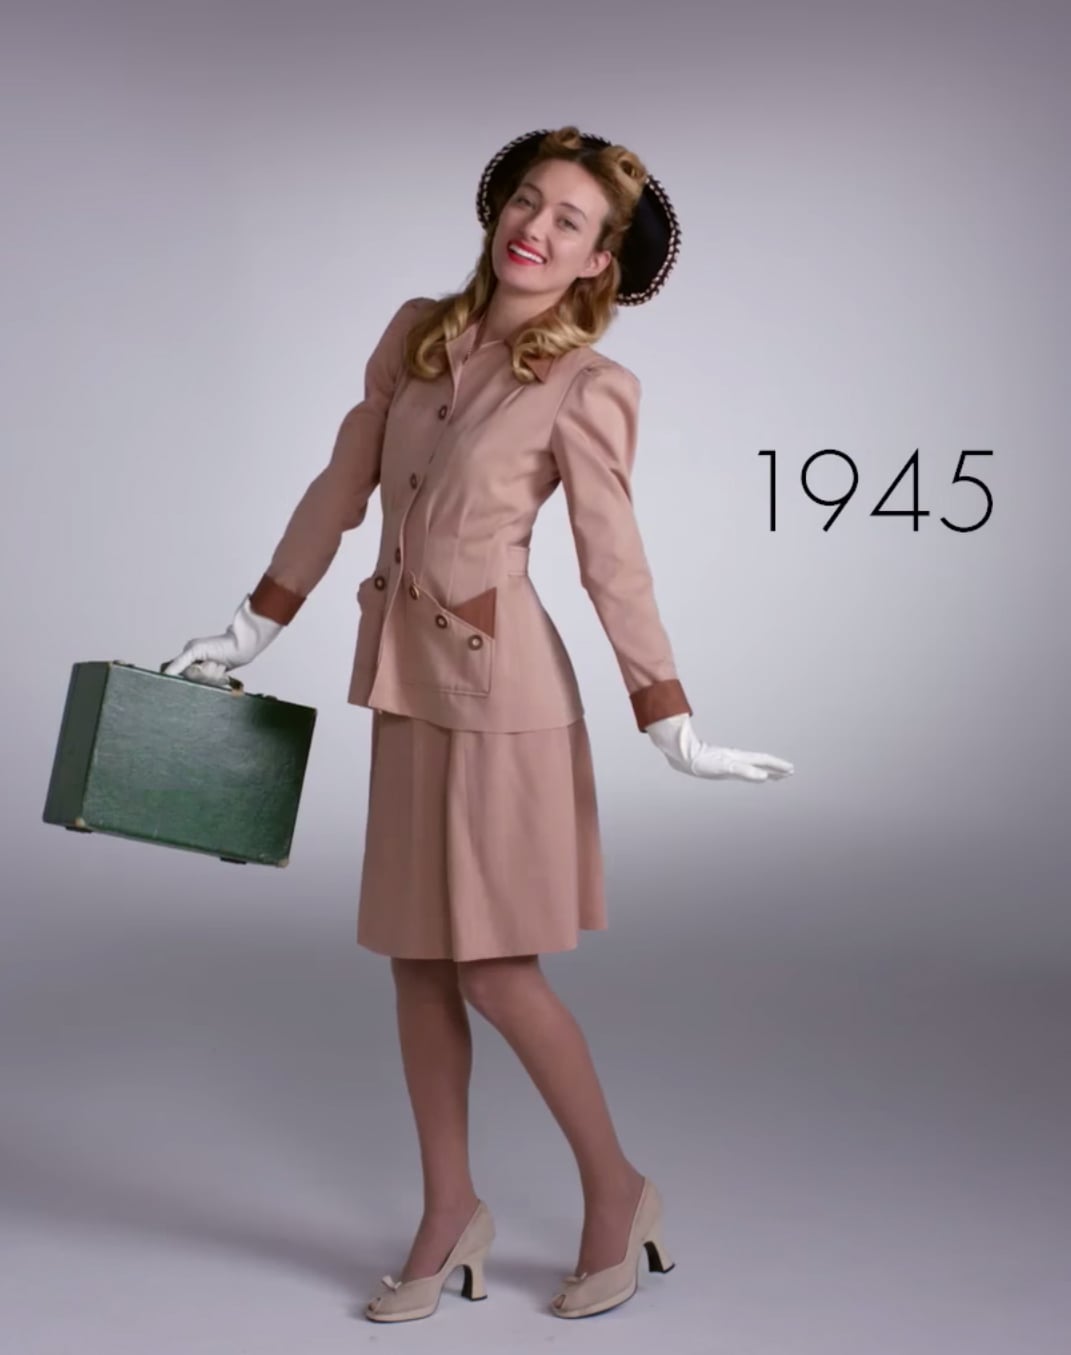 1945 | Watch 1 Woman Wear 100 Years of Fashion Trends in 2 Minutes |  POPSUGAR Fashion Photo 5